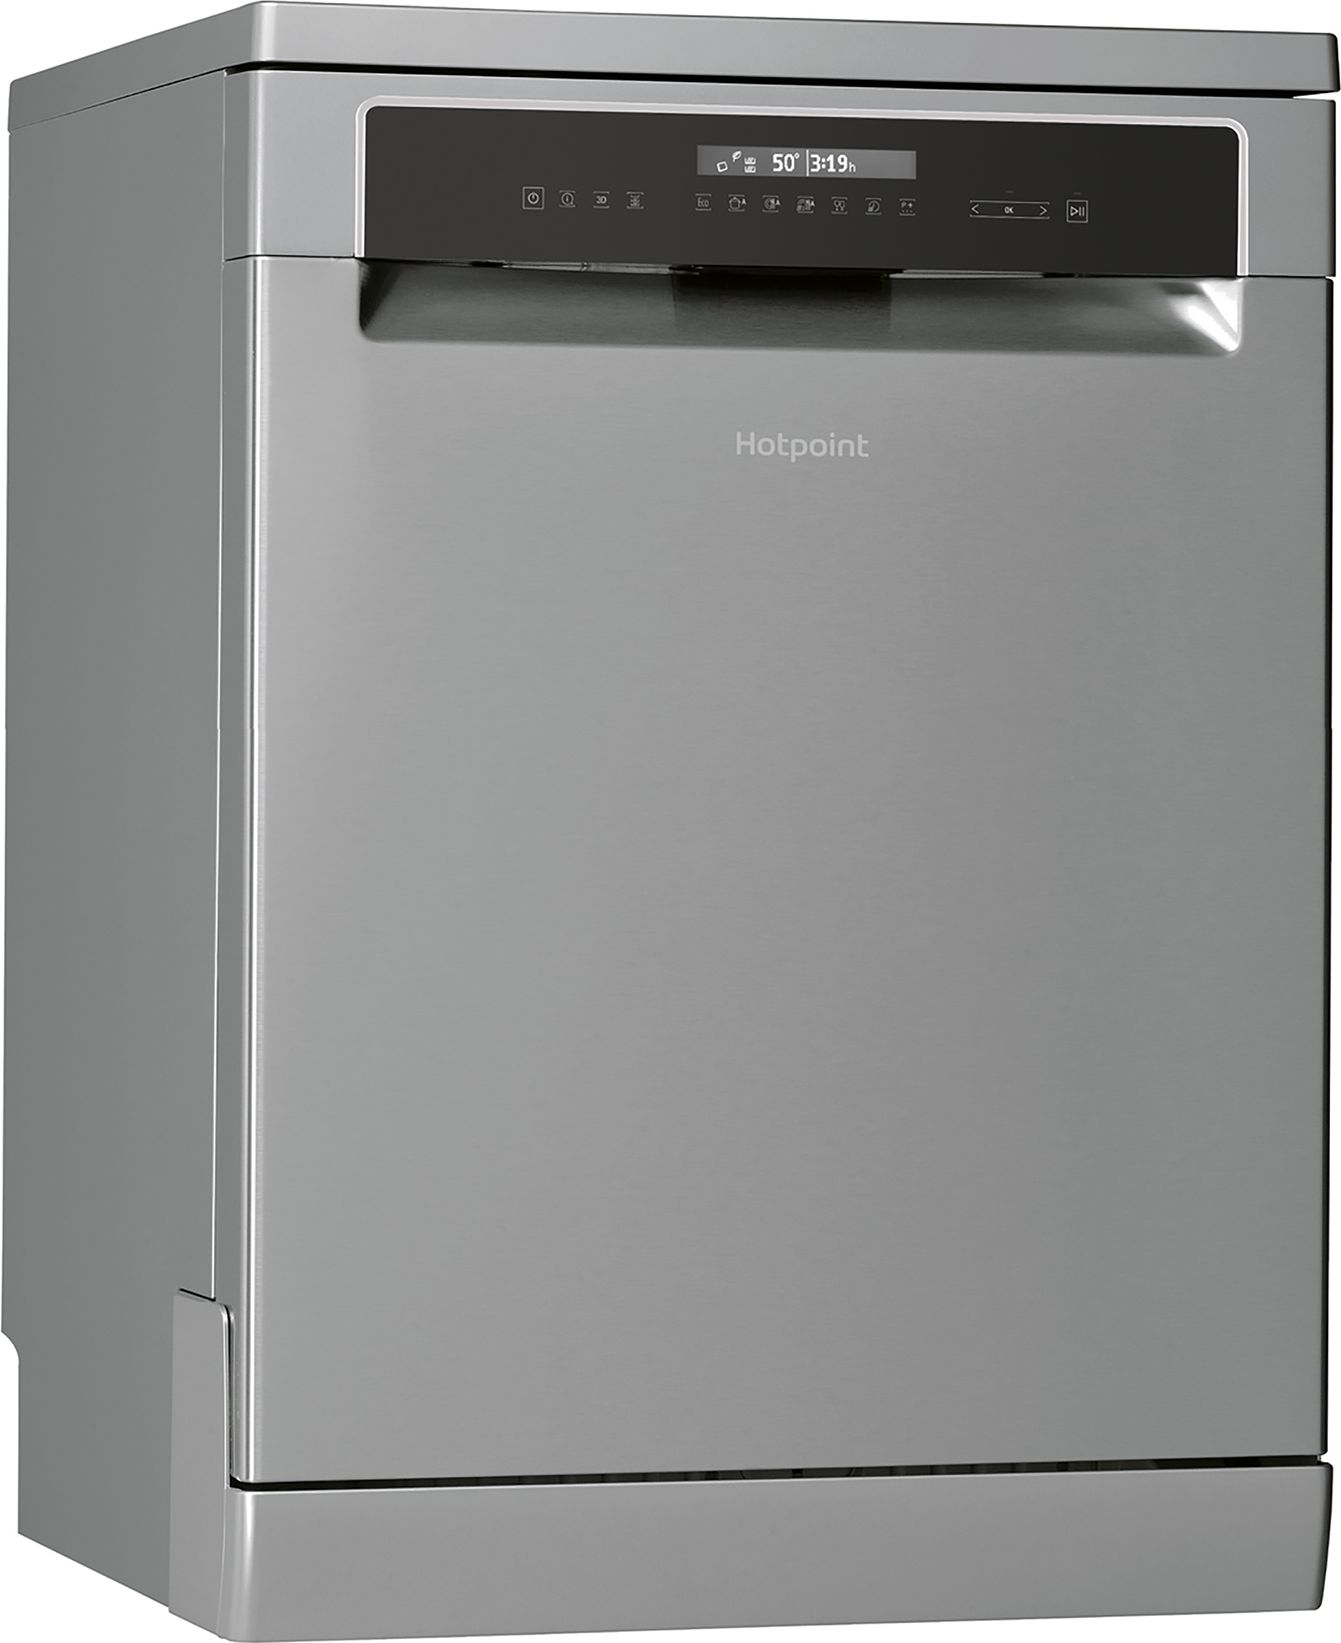 Hotpoint HFP5O41WLGXUK Standard Dishwasher - Stainless Steel Effect - C Rated, Stainless Steel